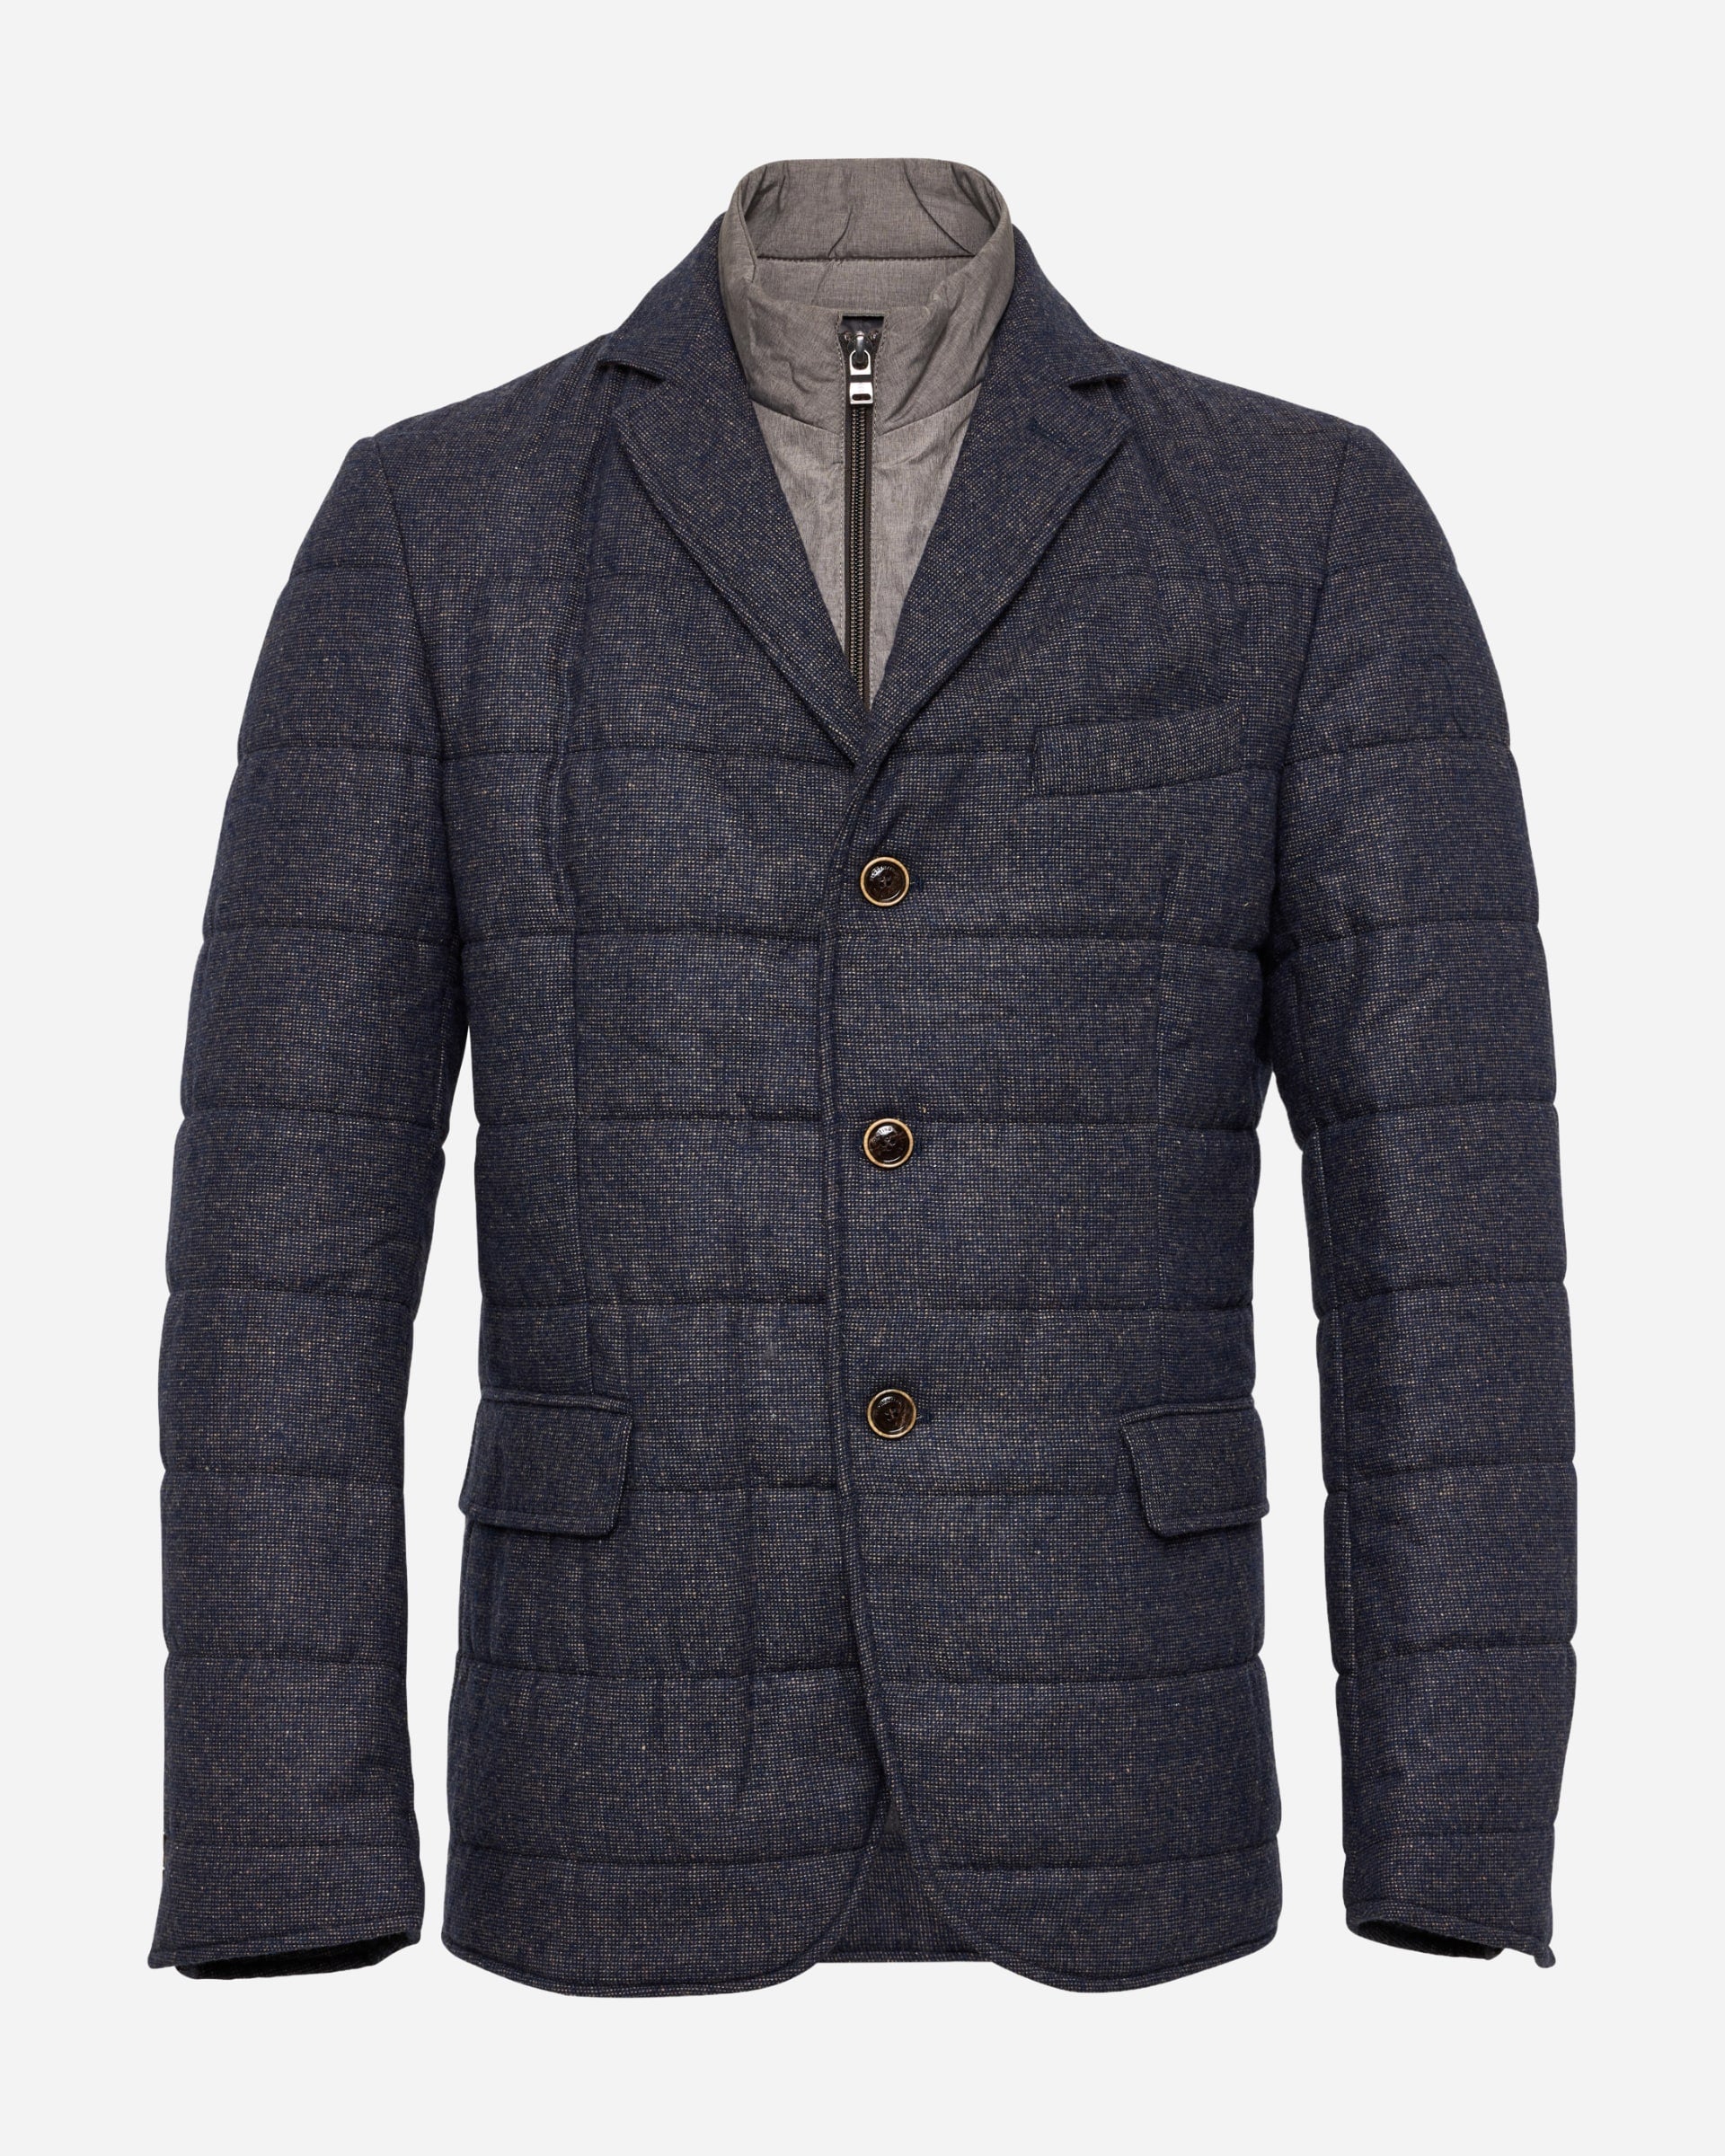 Padded Jacket with Vest - Men's Casual Jacket at Menzclub